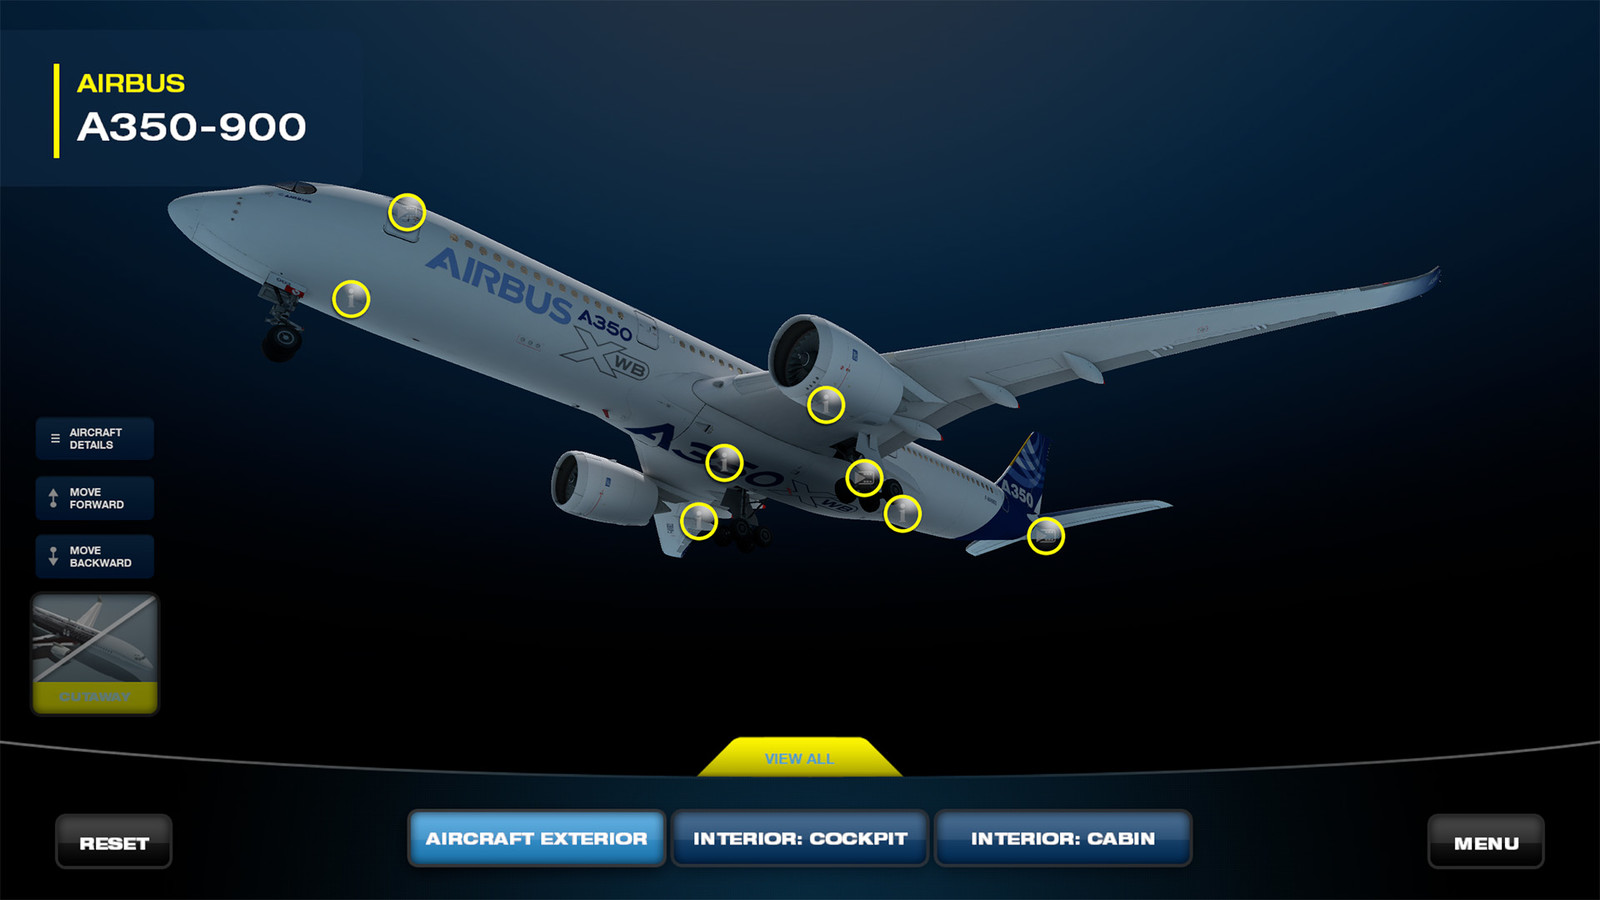 A350 model, has the landing gear detailed and animated.